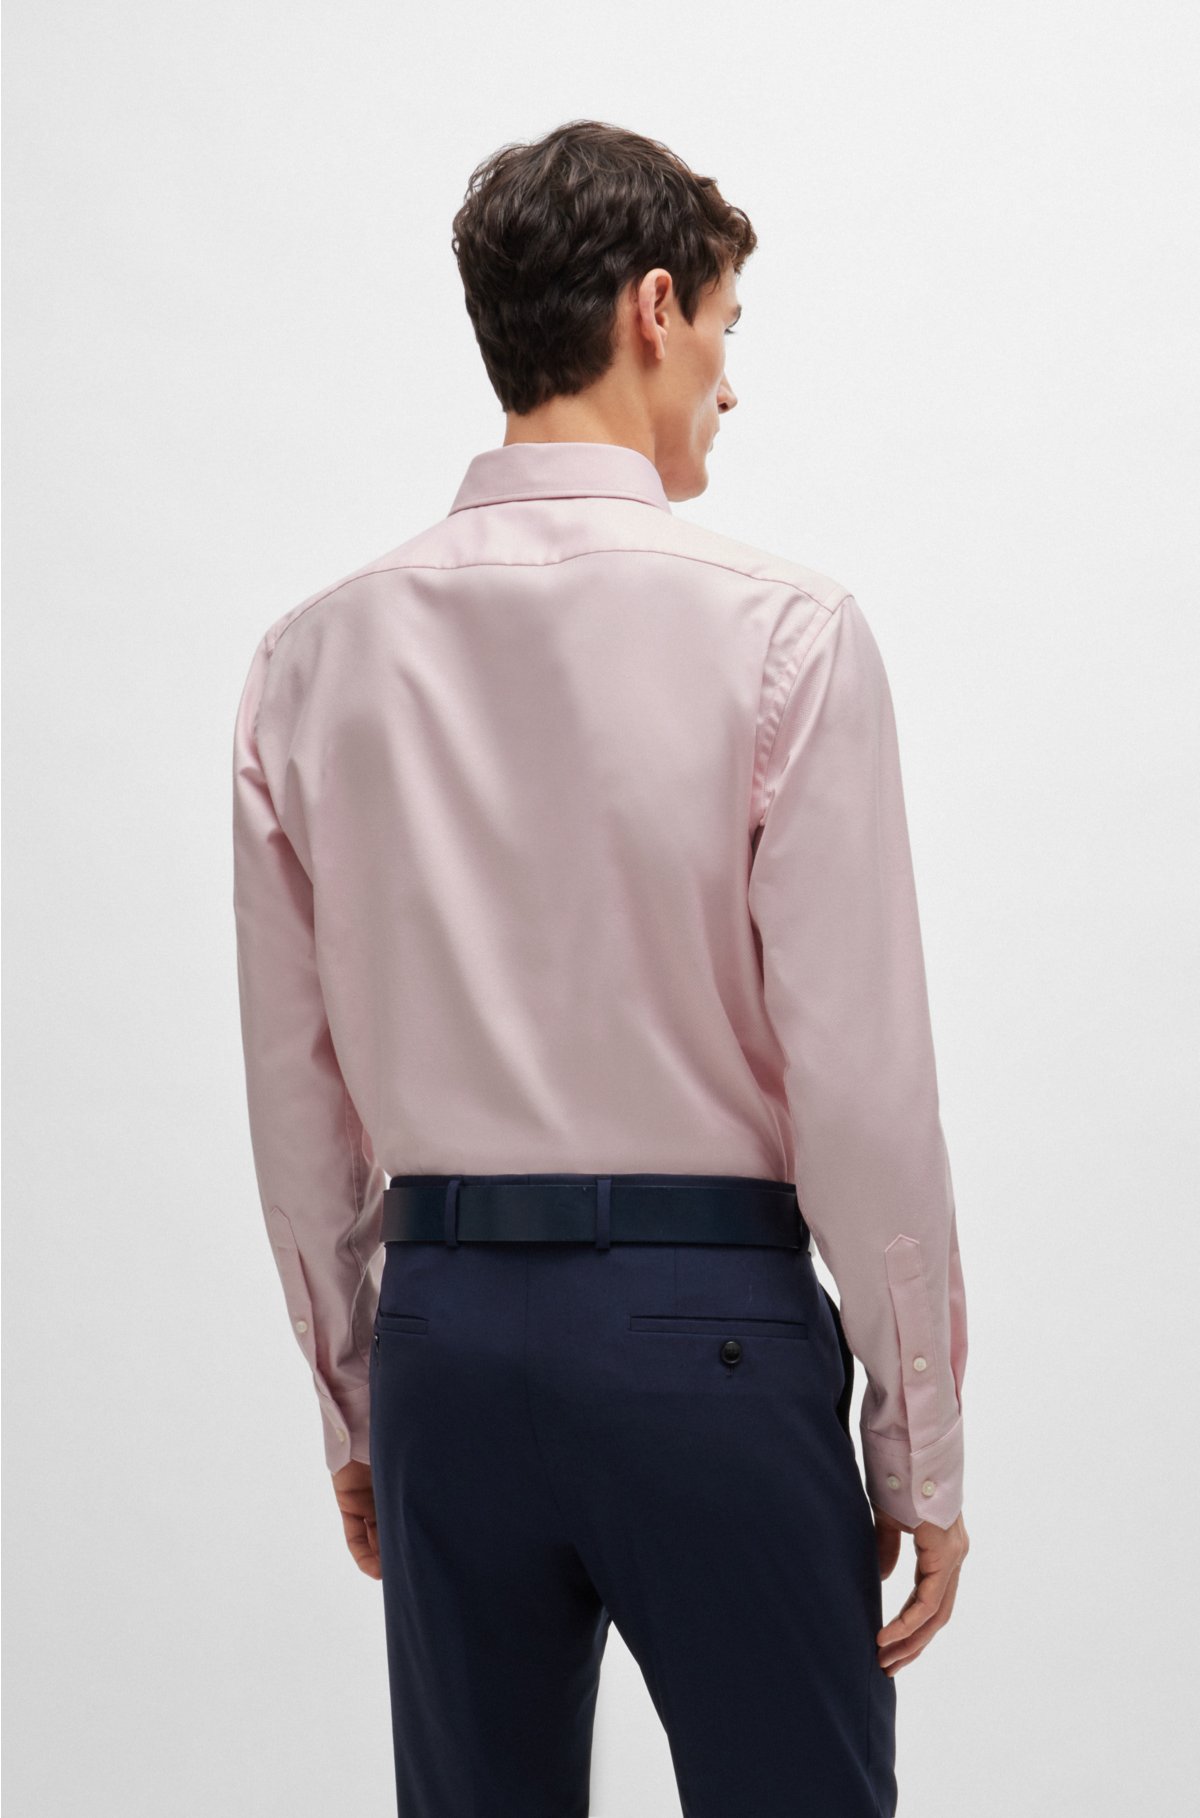 Regular-fit shirt in easy-iron structured stretch cotton, light pink